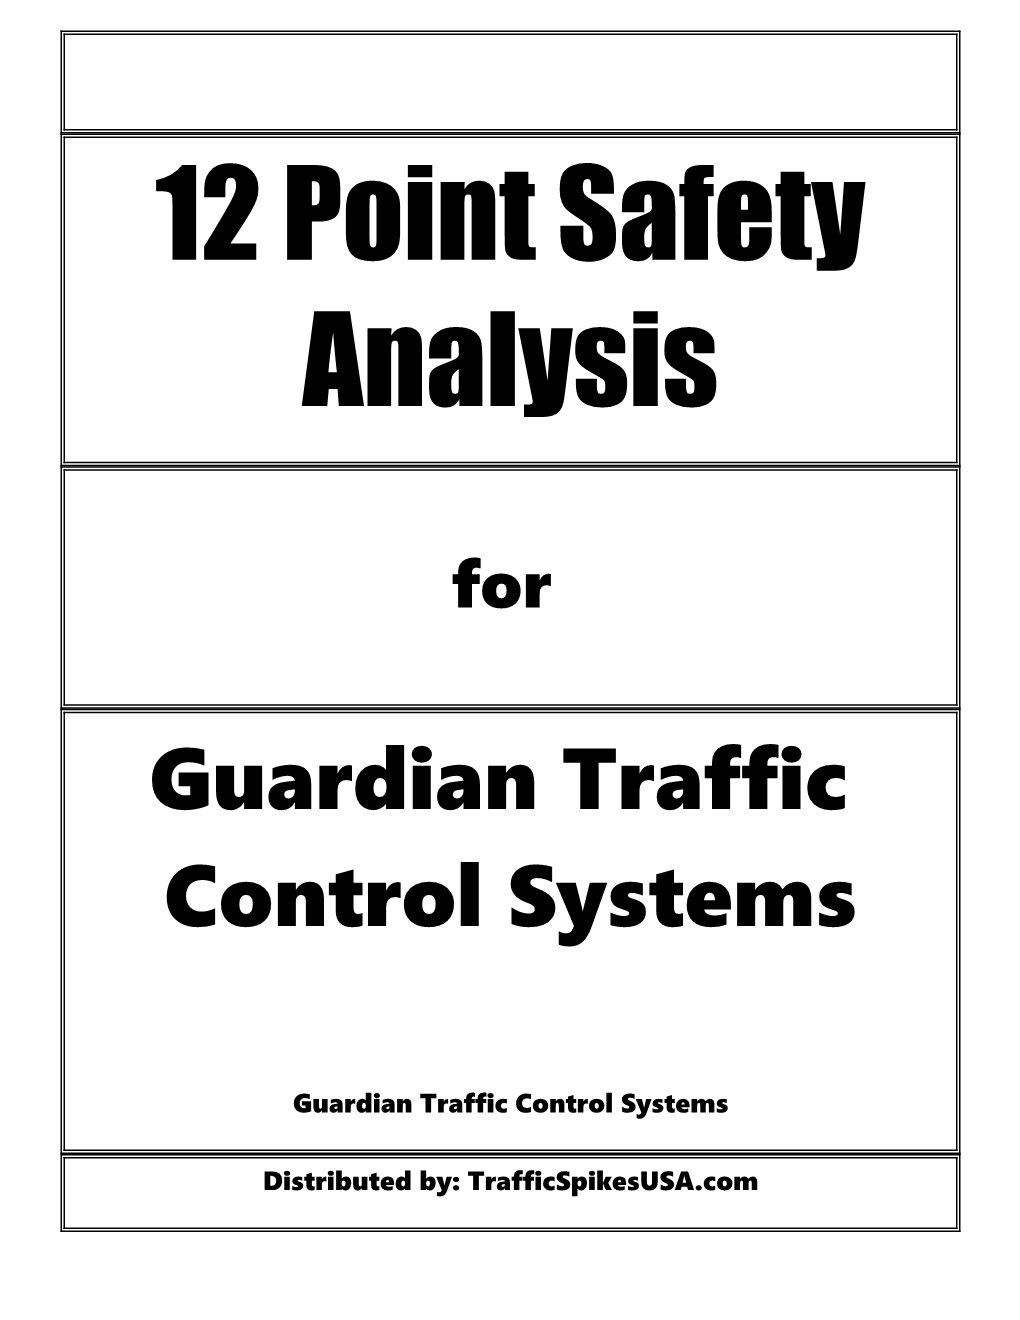 12 Point Safety Analysis for Traffic Spikes